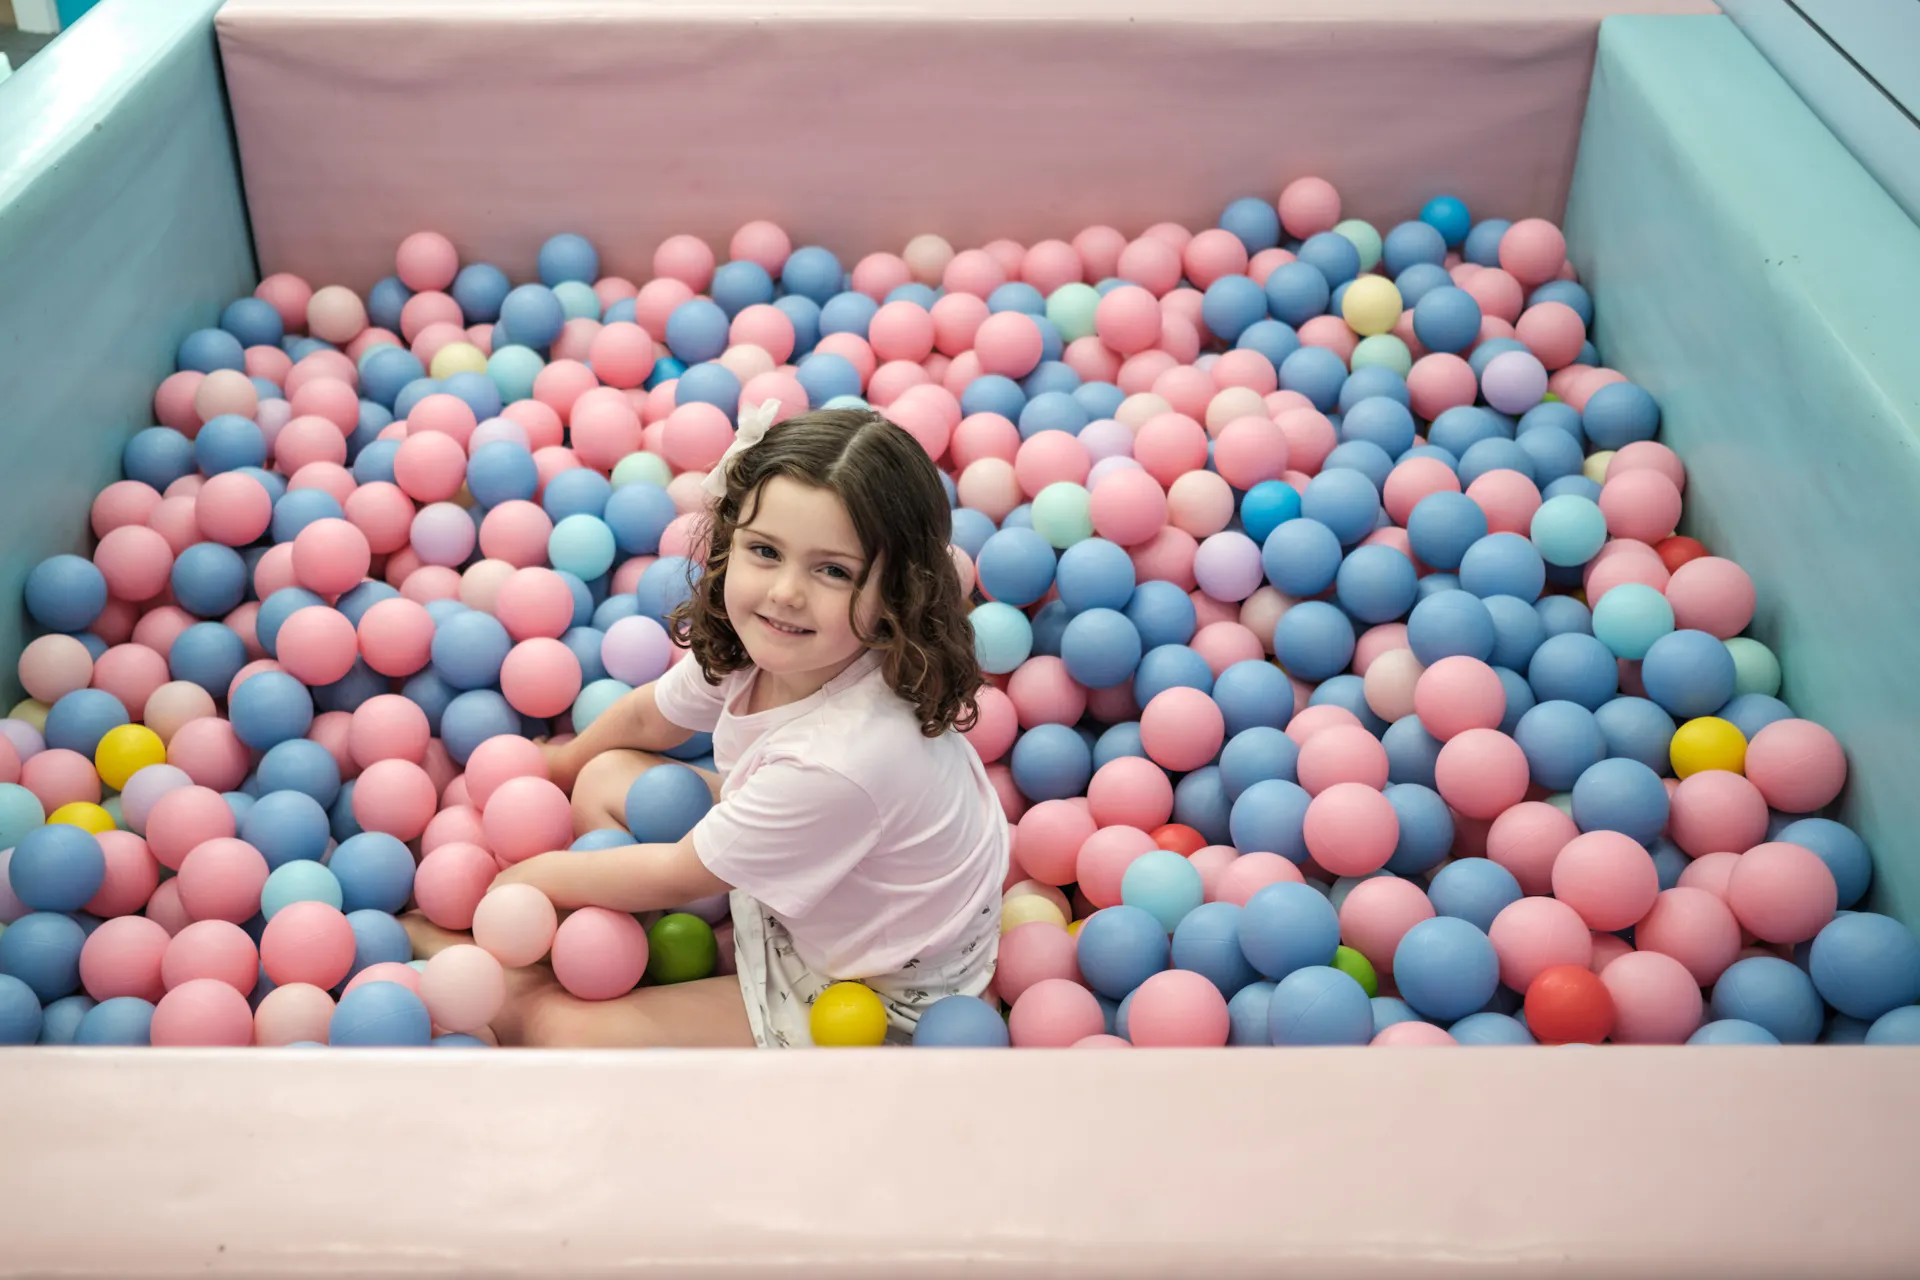 A visitor sitting in the ball pit